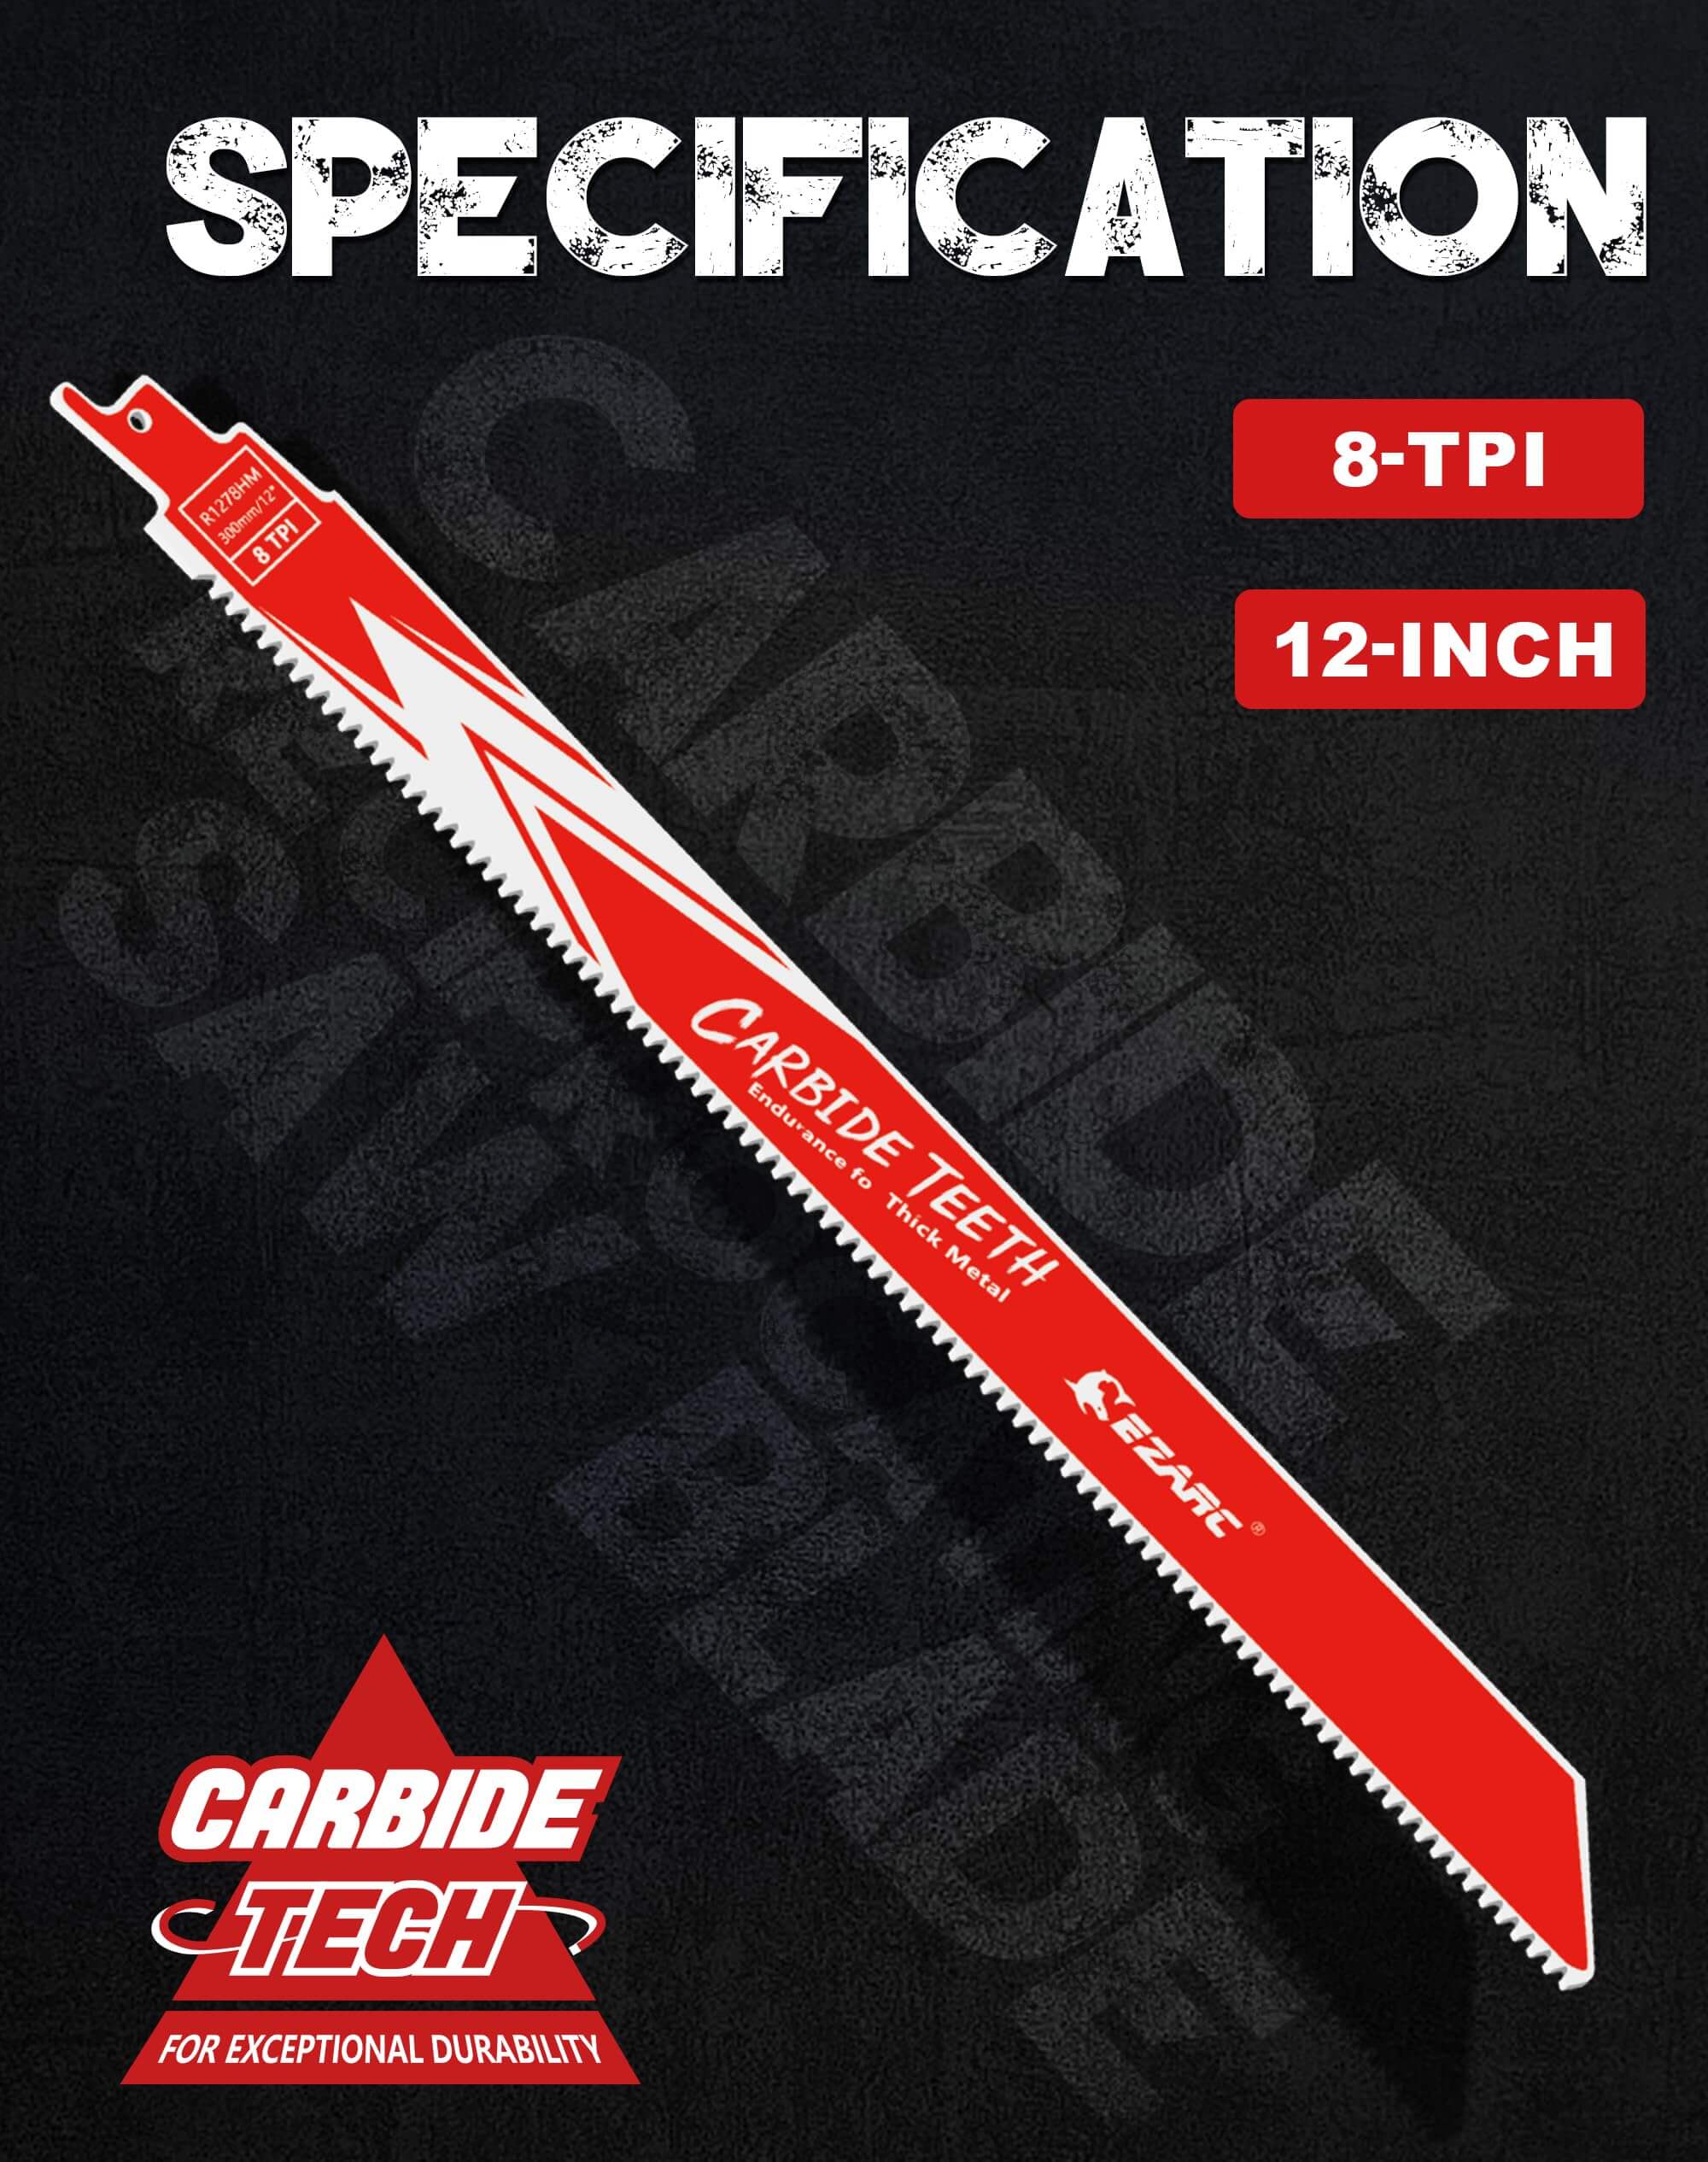 8TPI,12 in. Carbide Reciprocating Saw Blade for Thick Metal, Cast Iron, Alloy Steel